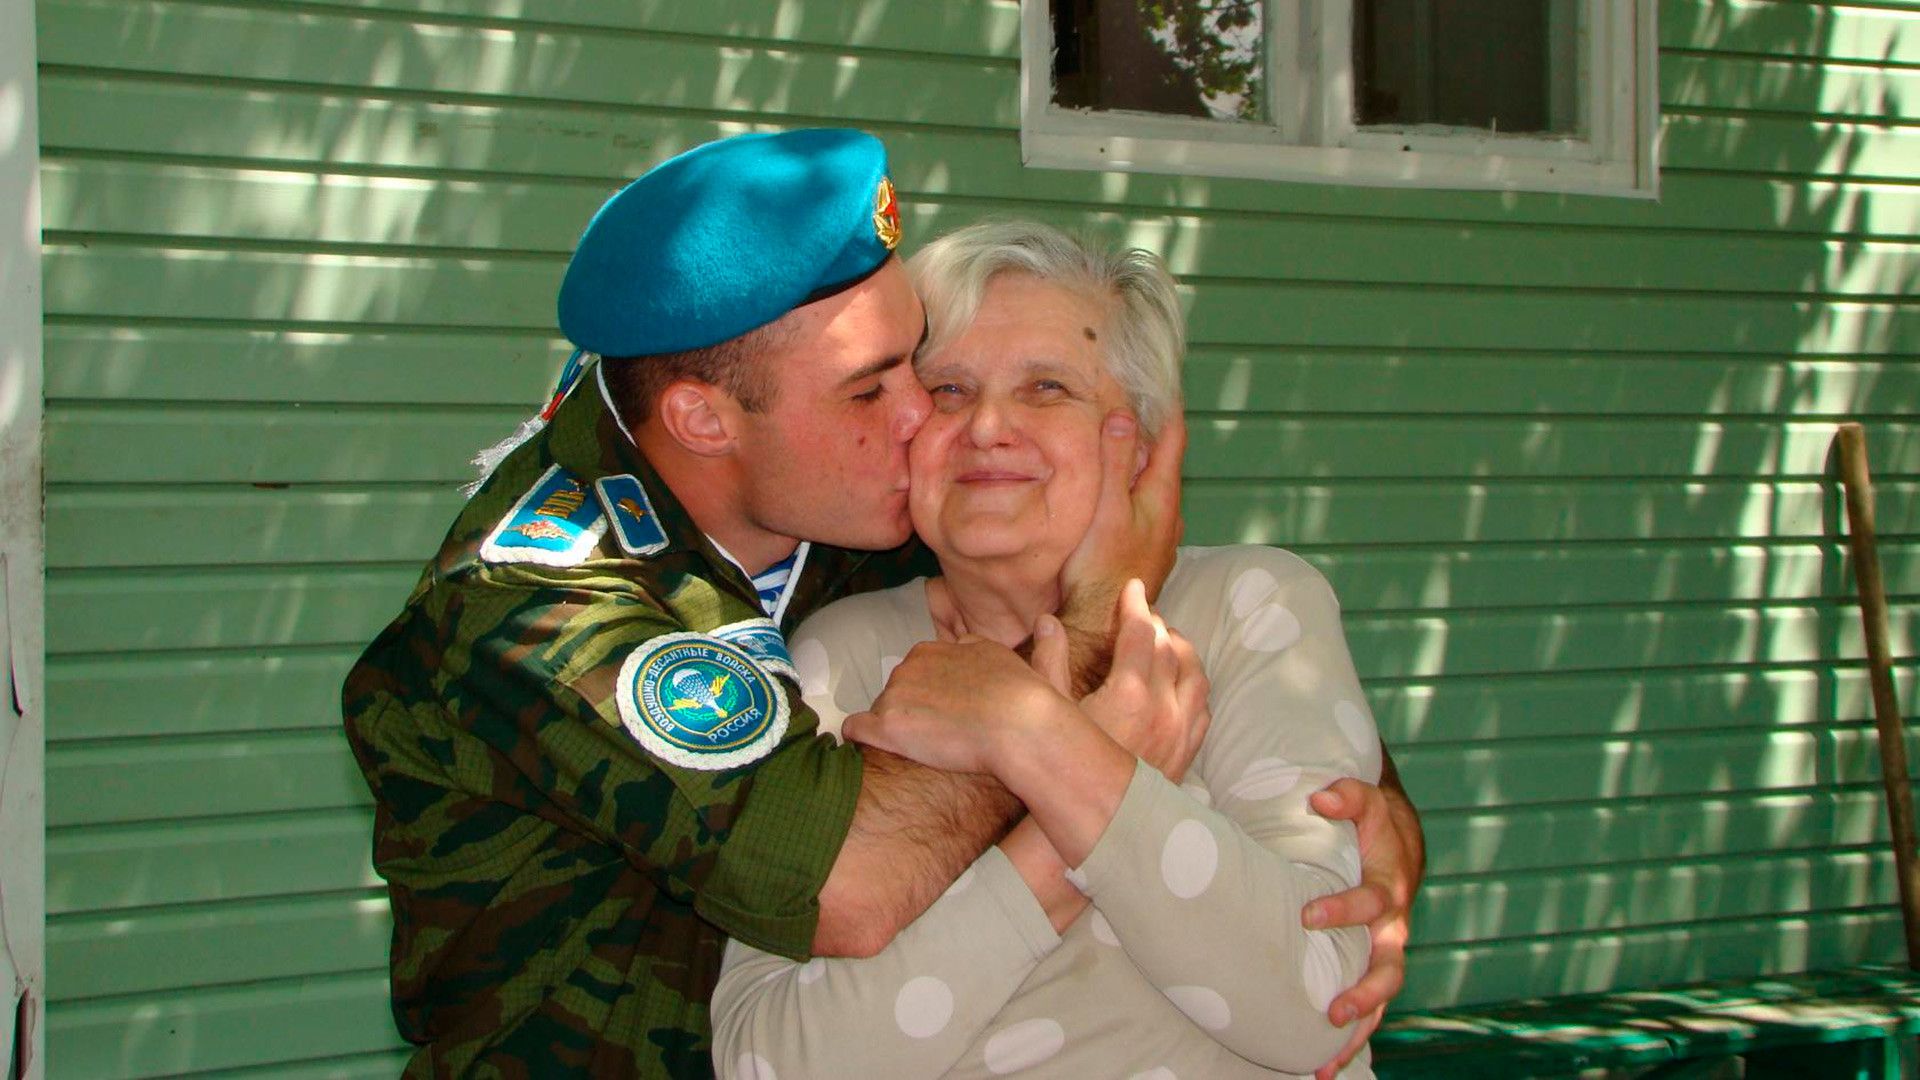 Tatiana's adopted son kisses his mum when leaving to serve at the army. (May 2018)